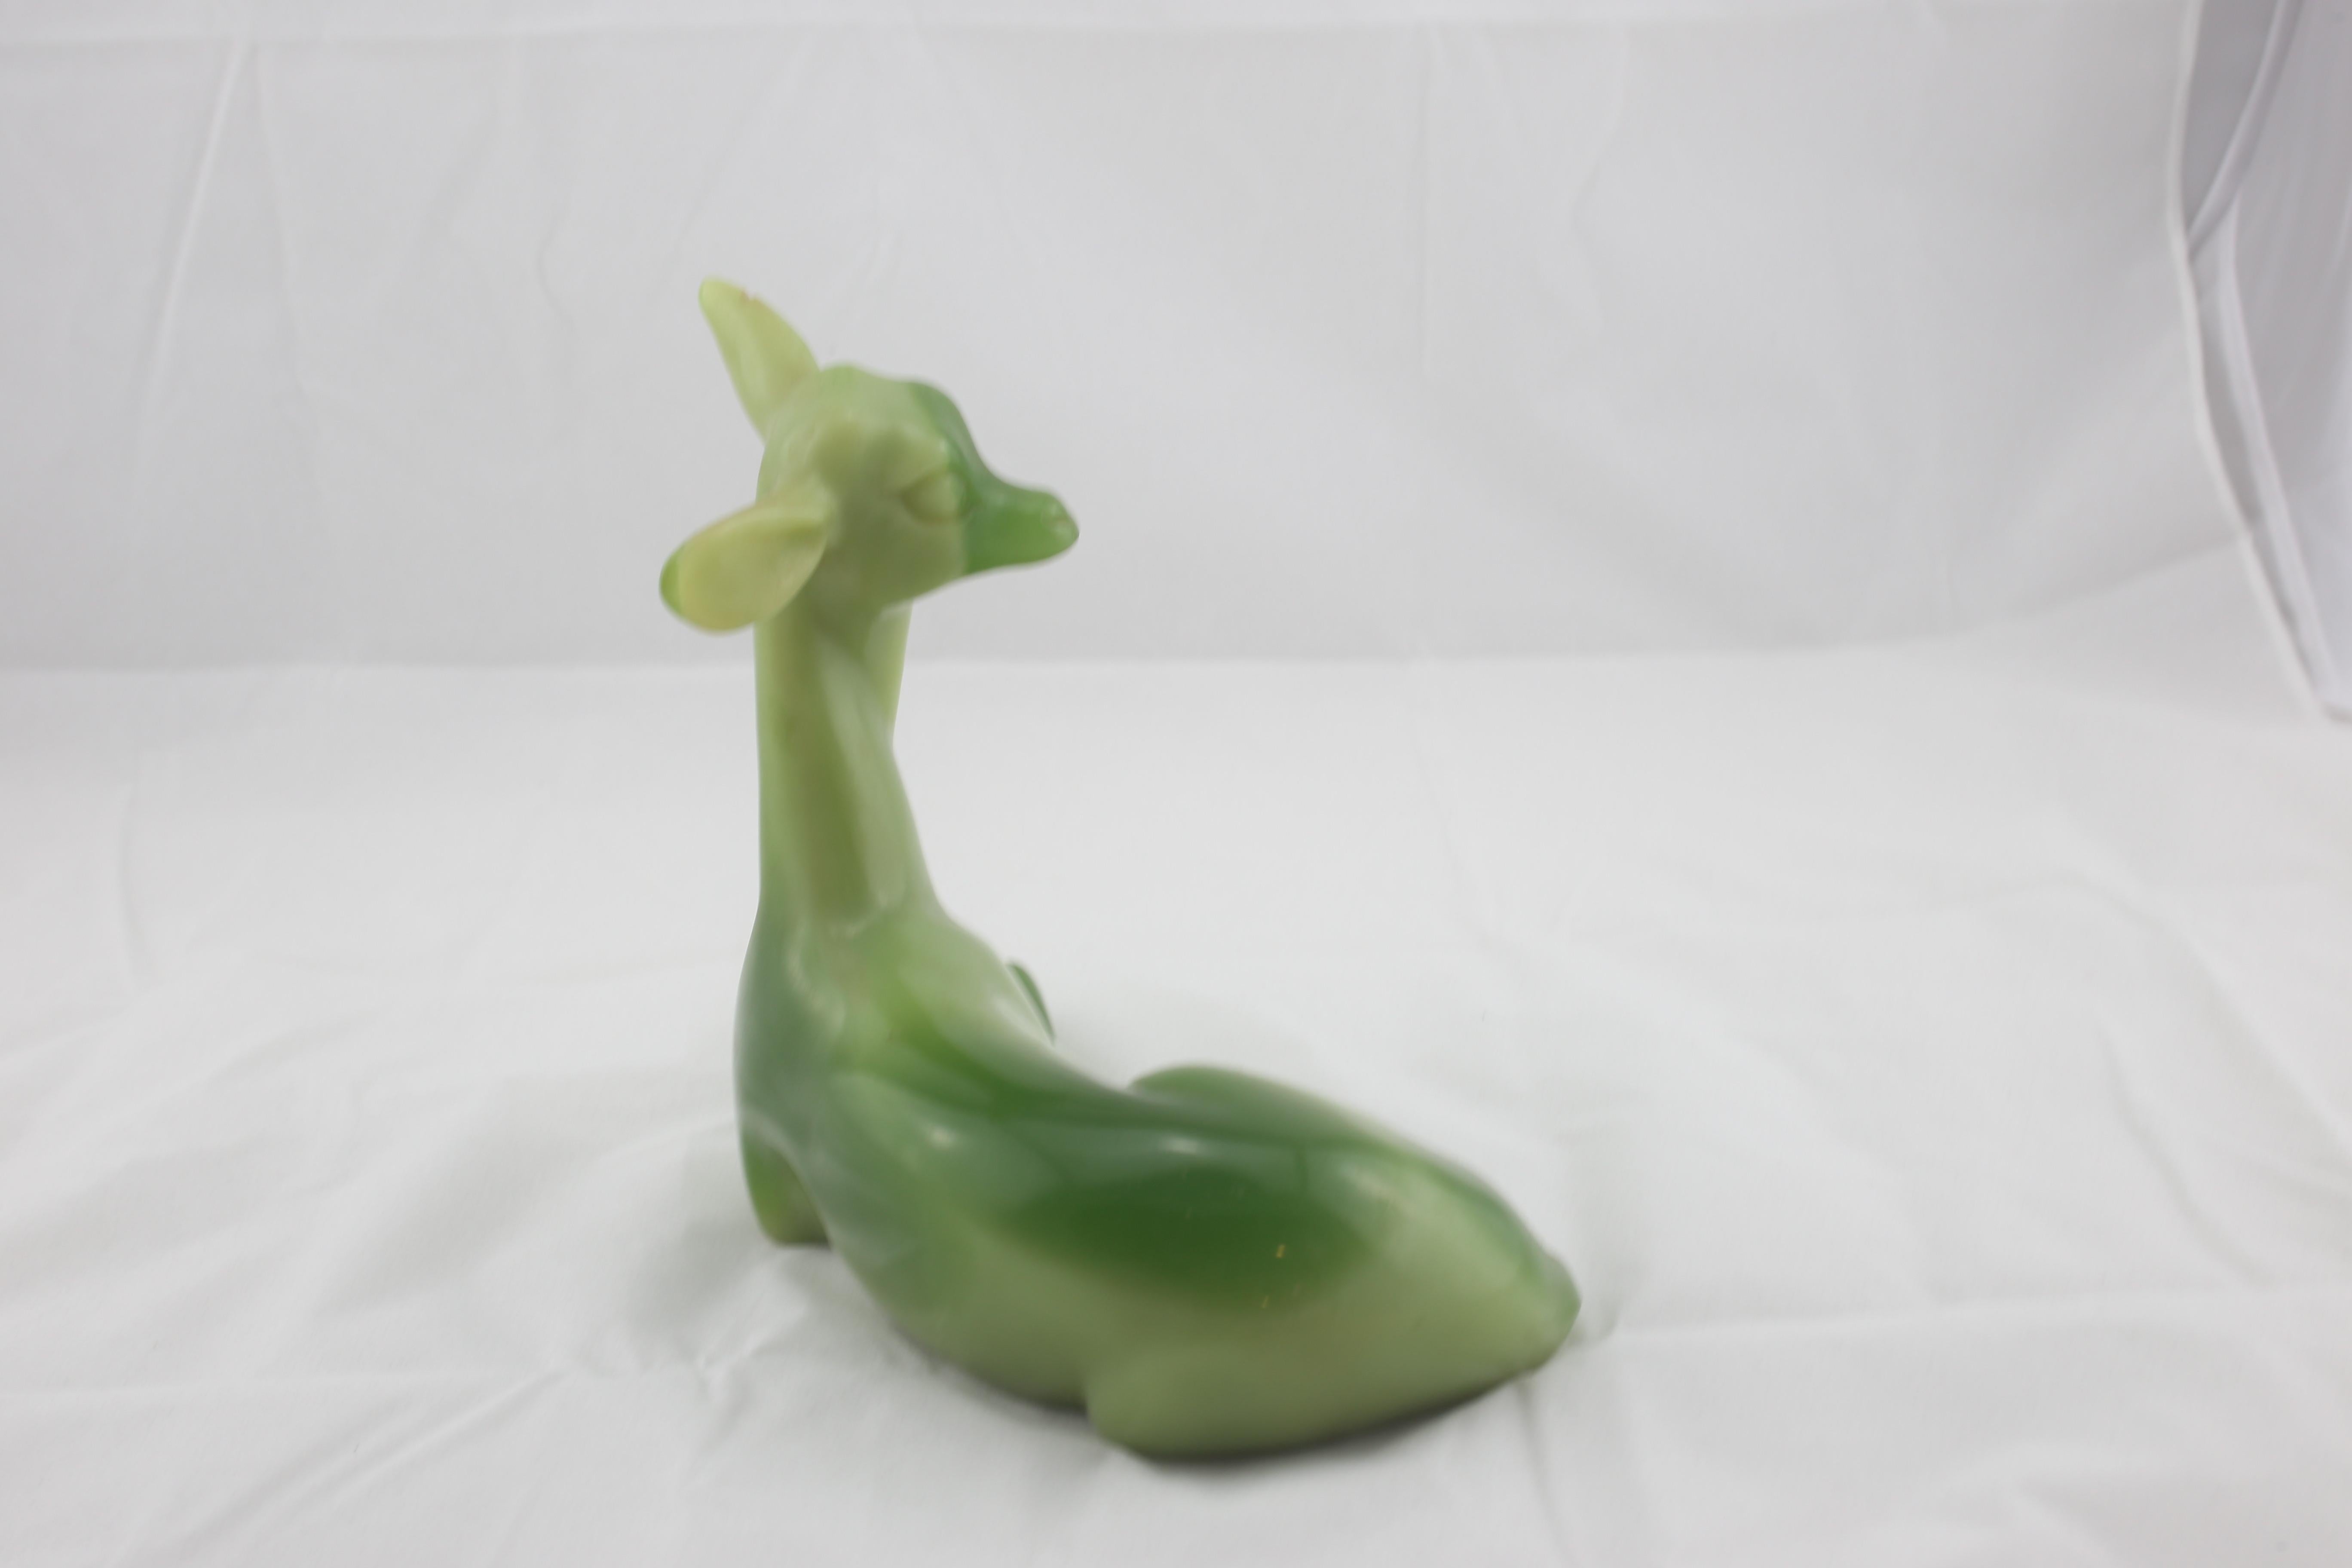 Mid-Century Modern Italian Animal Sculpture in Green Resin of a Deer, 1960s For Sale 2